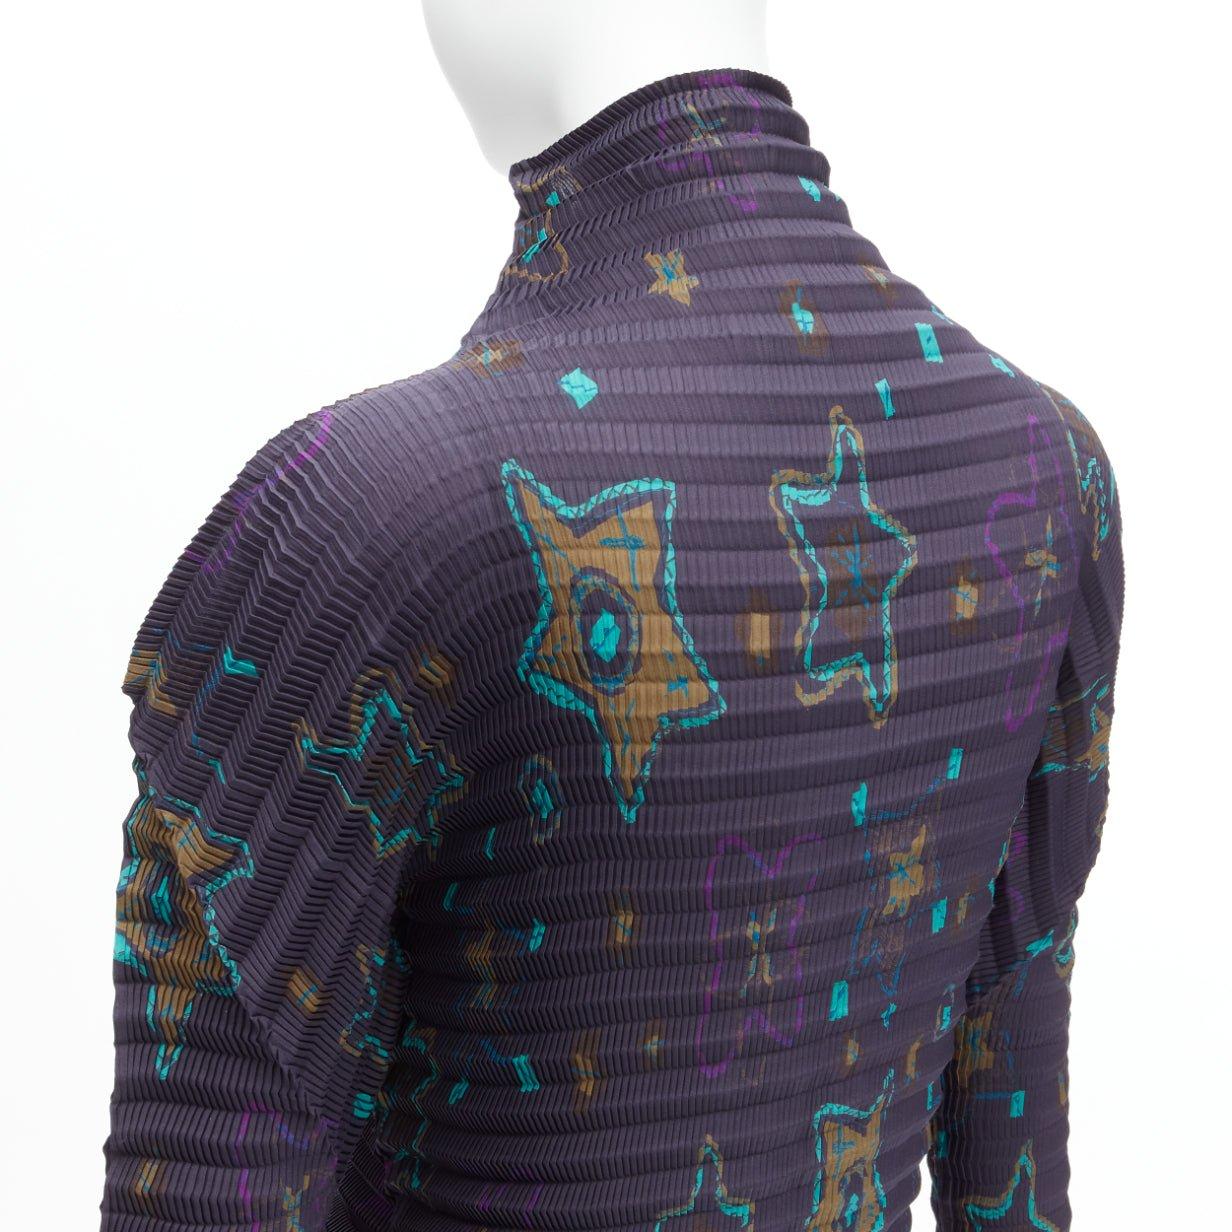 rare ISSEY MIYAKE PLEATS PLEASE green star print dark blue stand collar pleated shirt top JP2 M
Reference: TGAS/D00468
Brand: Issey Miyake Pleats Please
Material: Polyester
Color: Navy, Multicolour
Pattern: Abstract
Closure: Button
Made in: